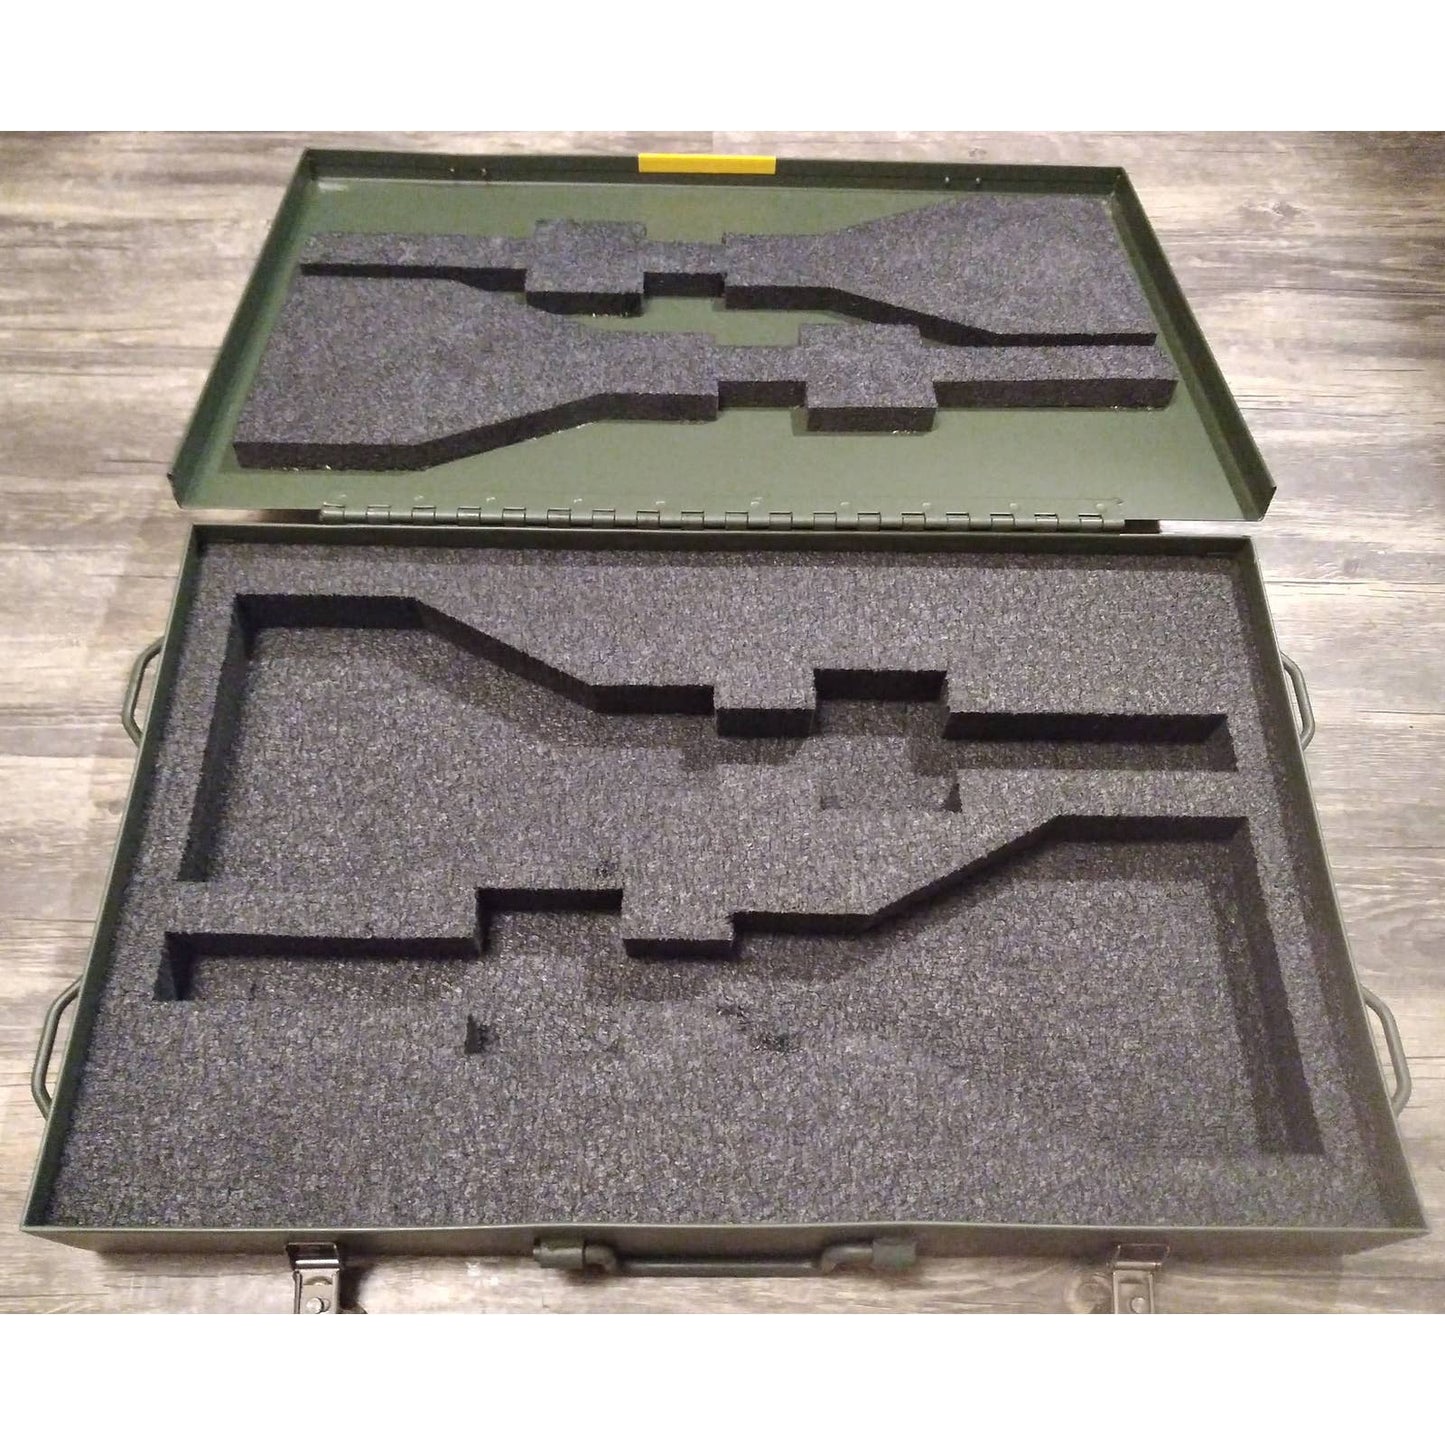 Military metal case heavy duty with padding | free us shipping! | u.s. army surplus padded box